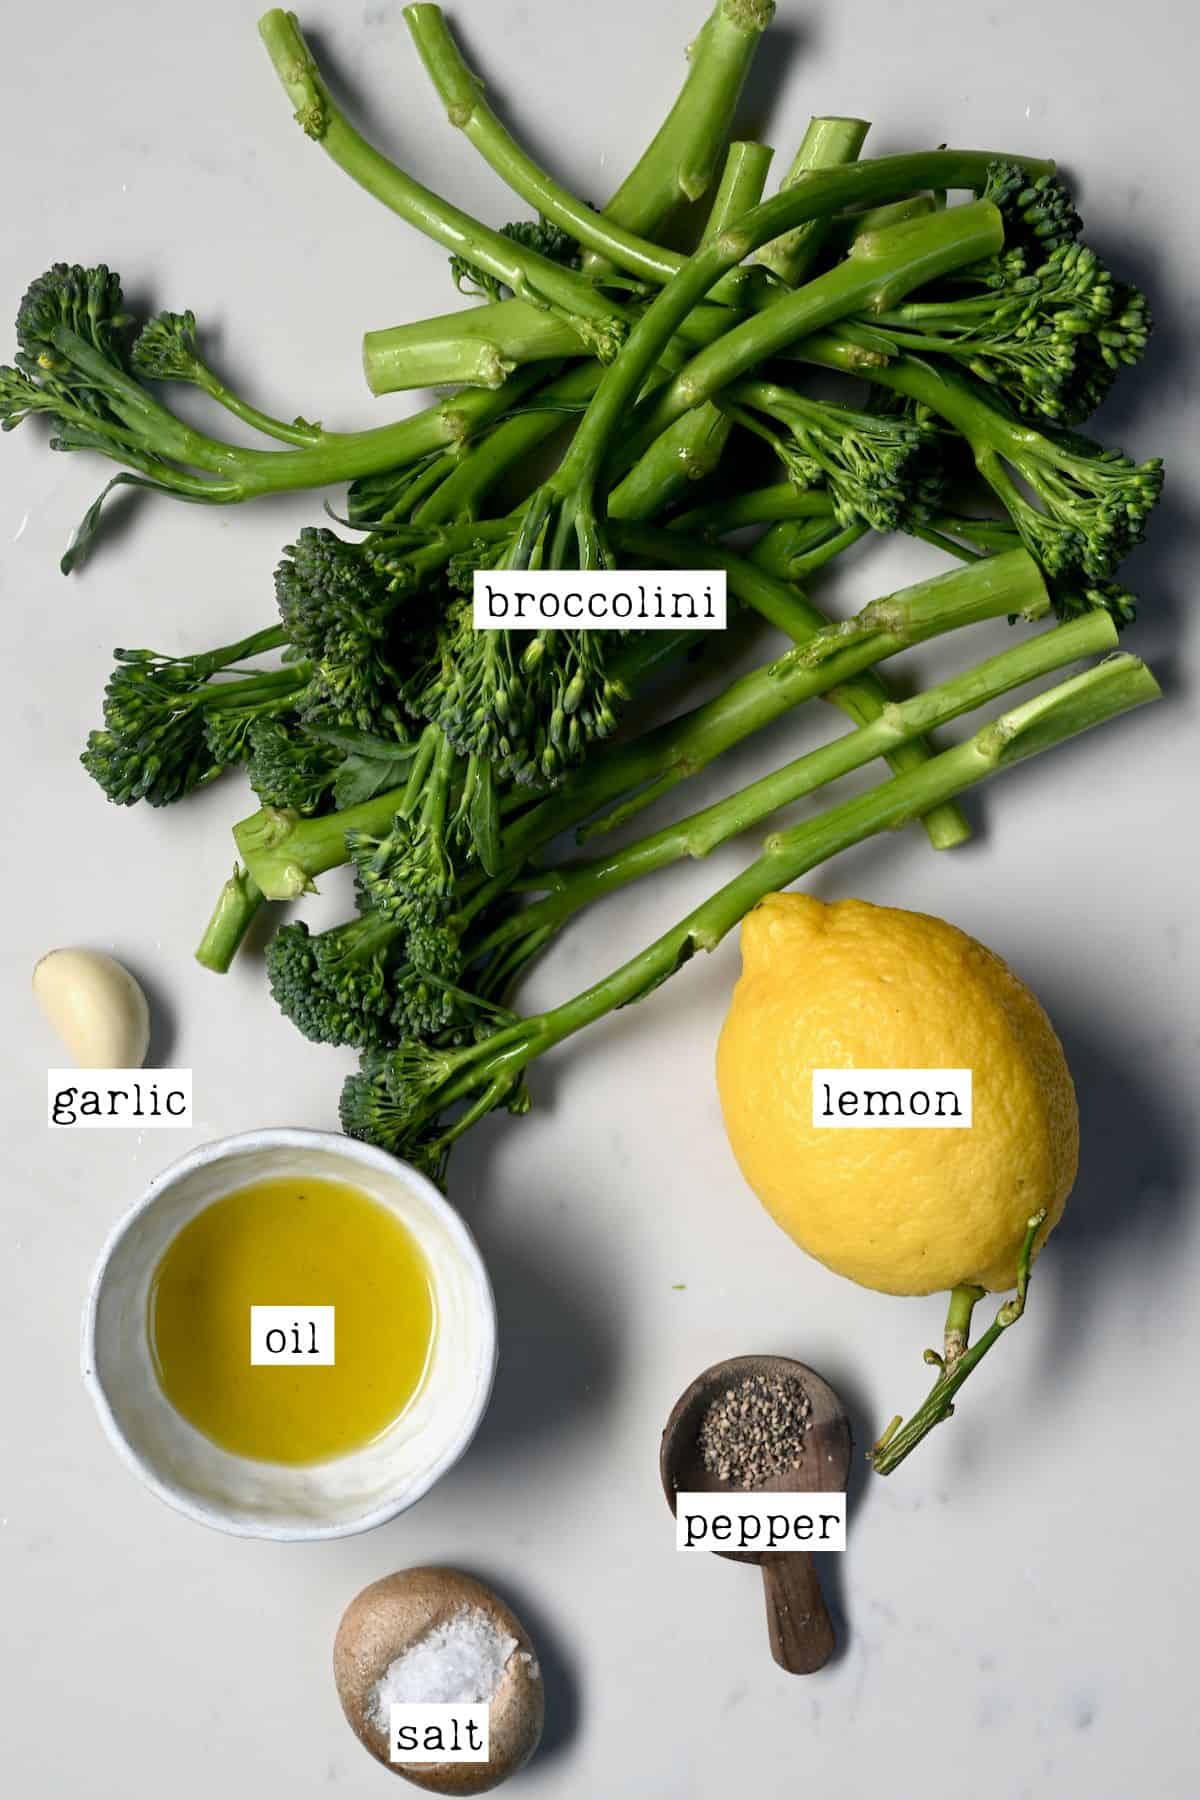 Ingredients for sautéing broccolini